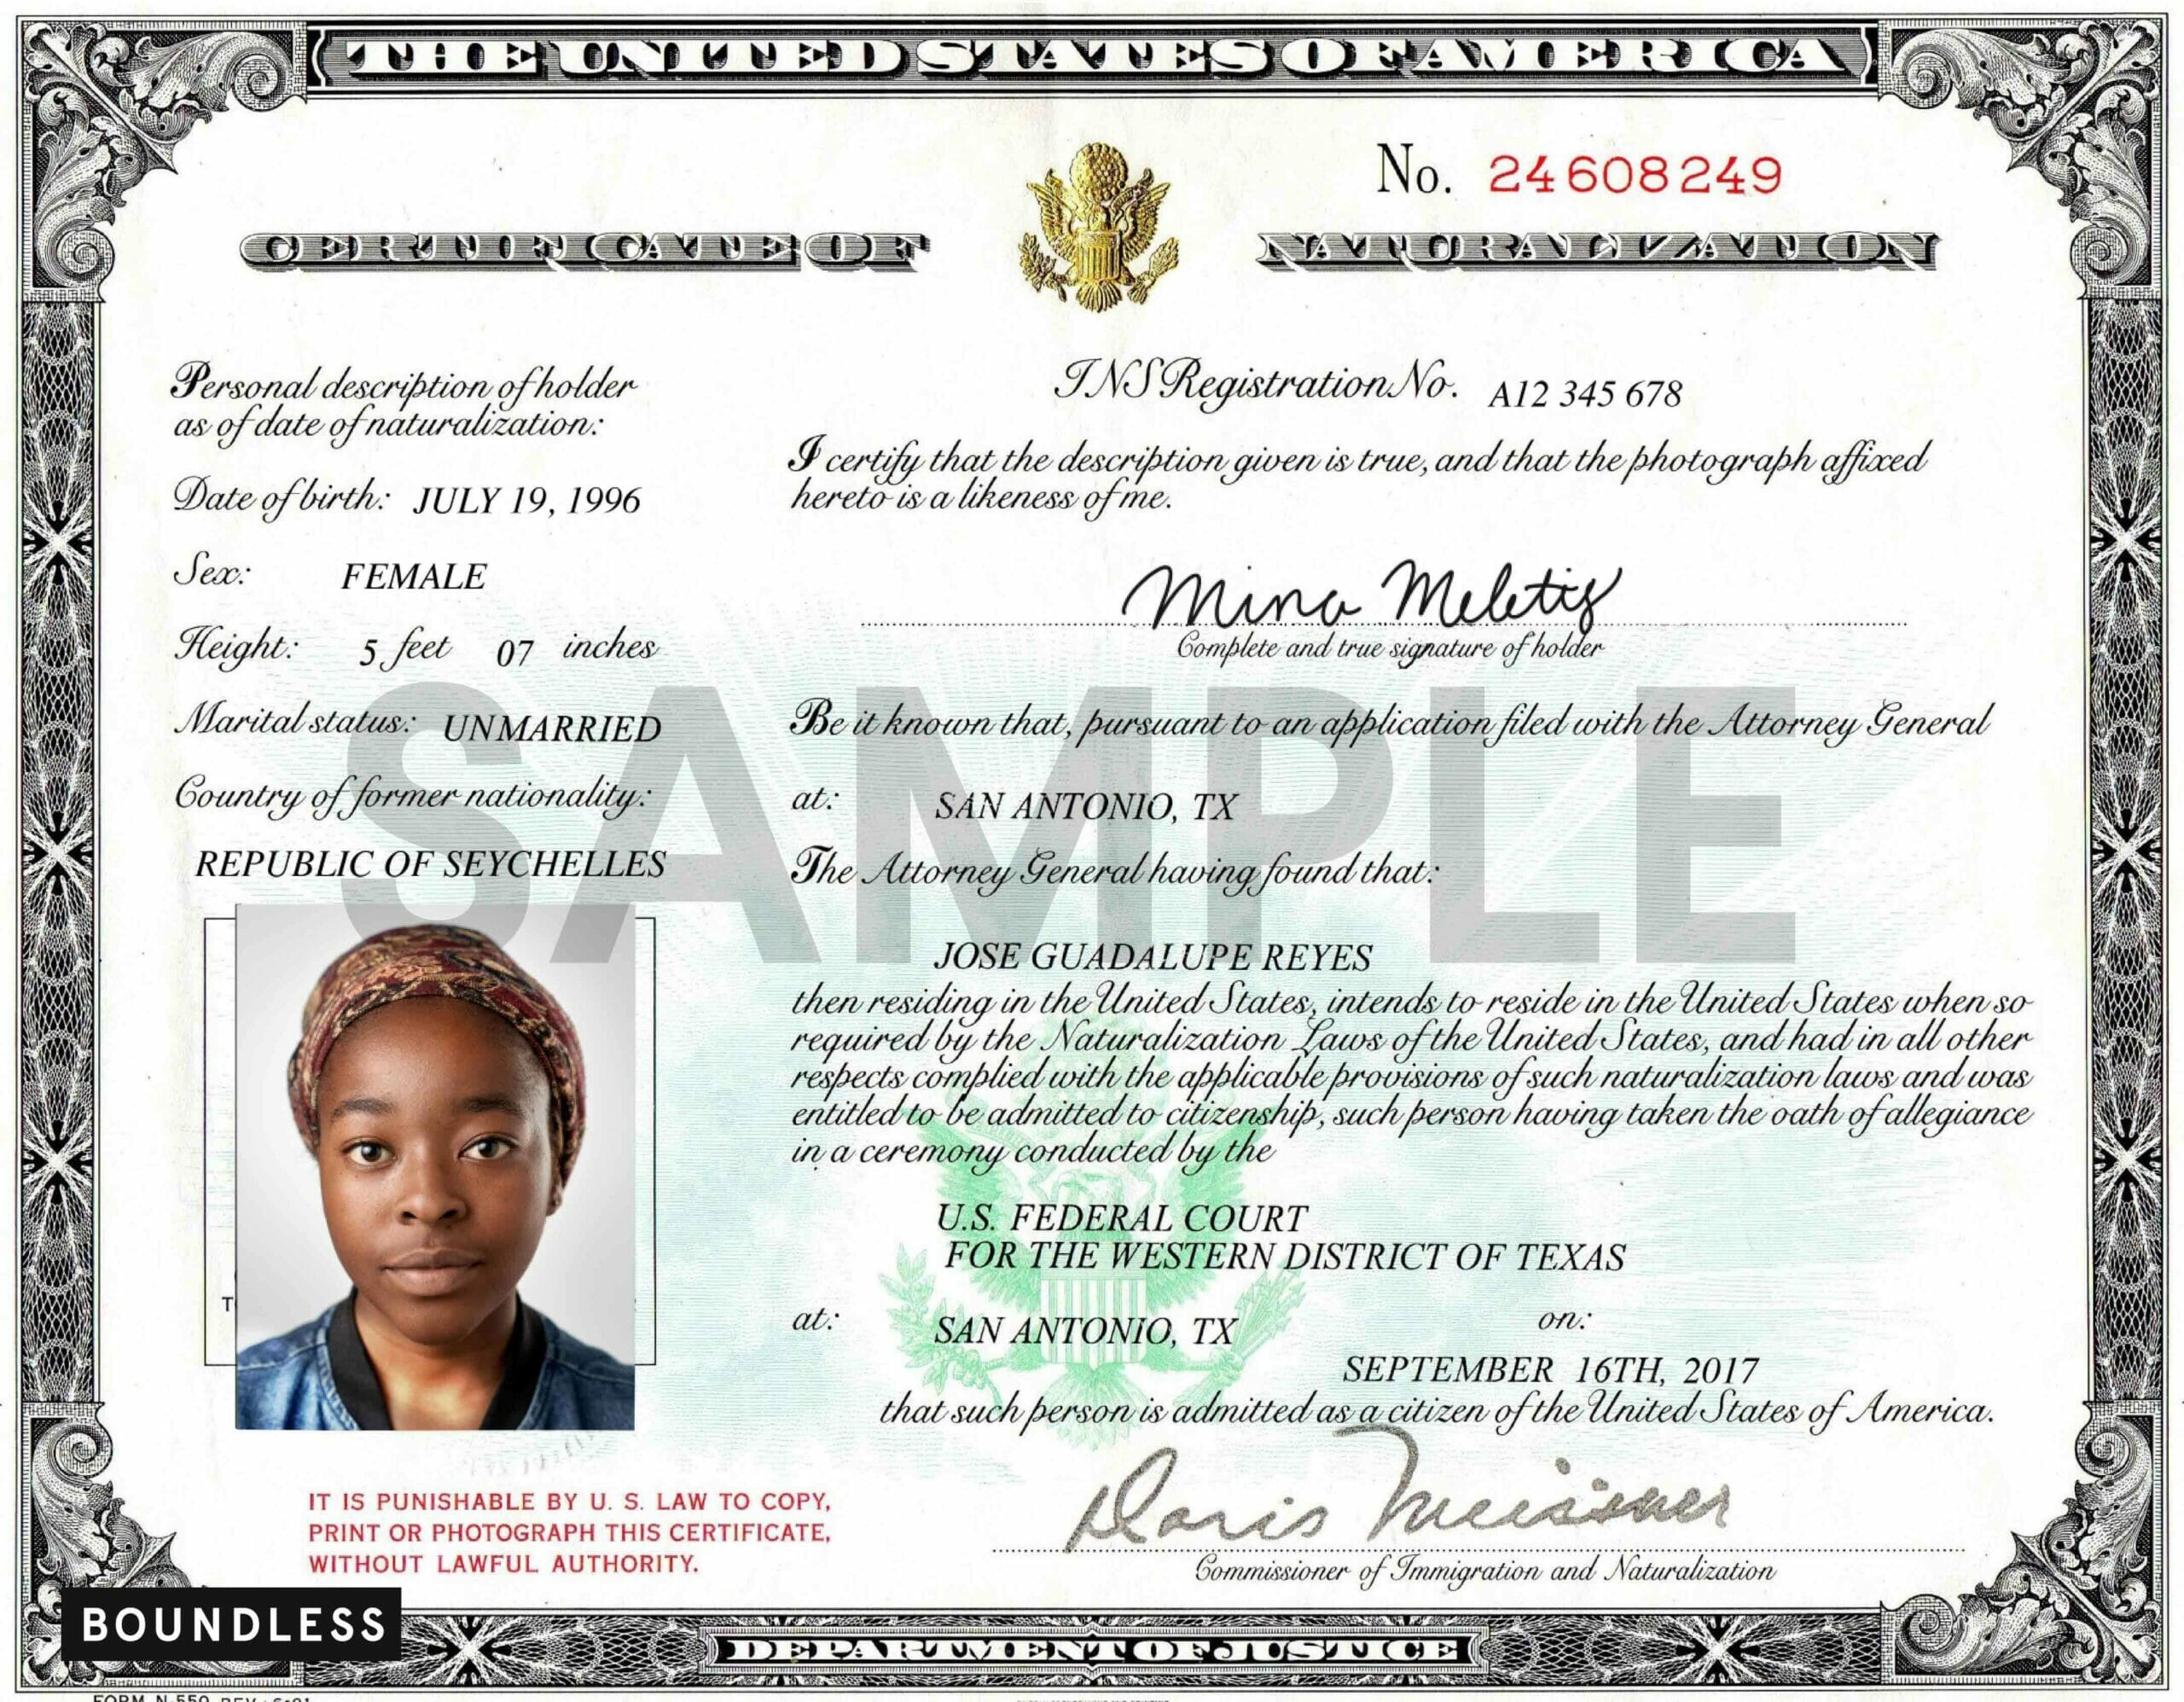 Alphabet n-565 replacement of naturalization certificate